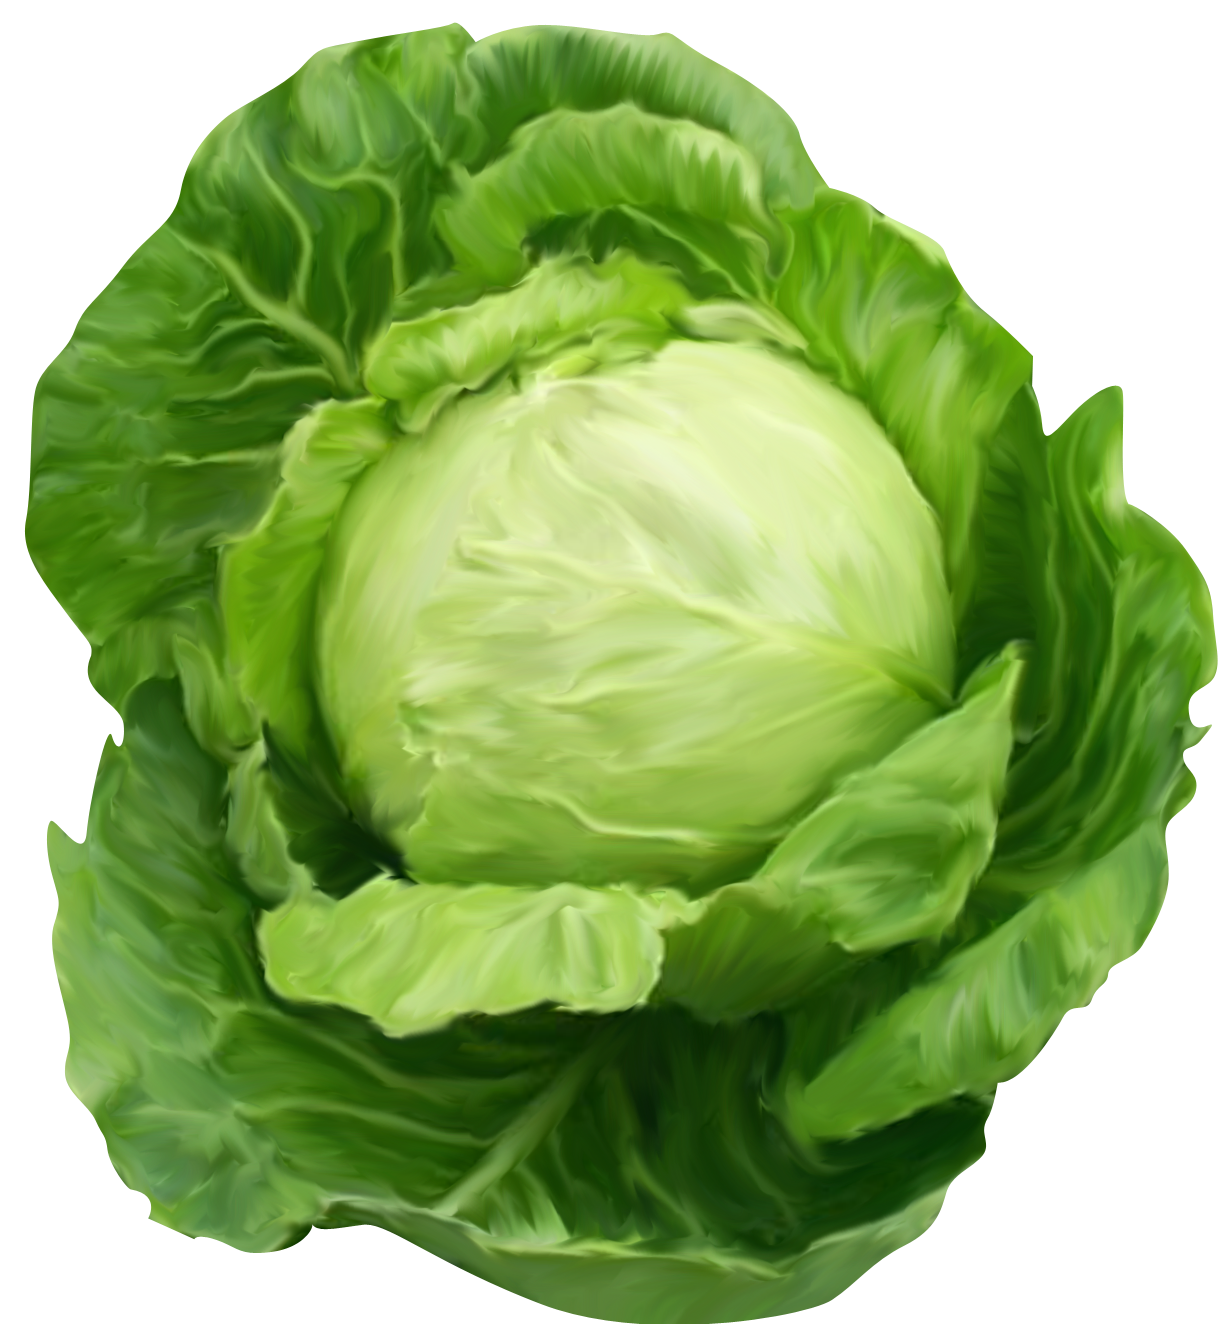 Cabbage picture gallery yopriceville. Lettuce clipart spinach